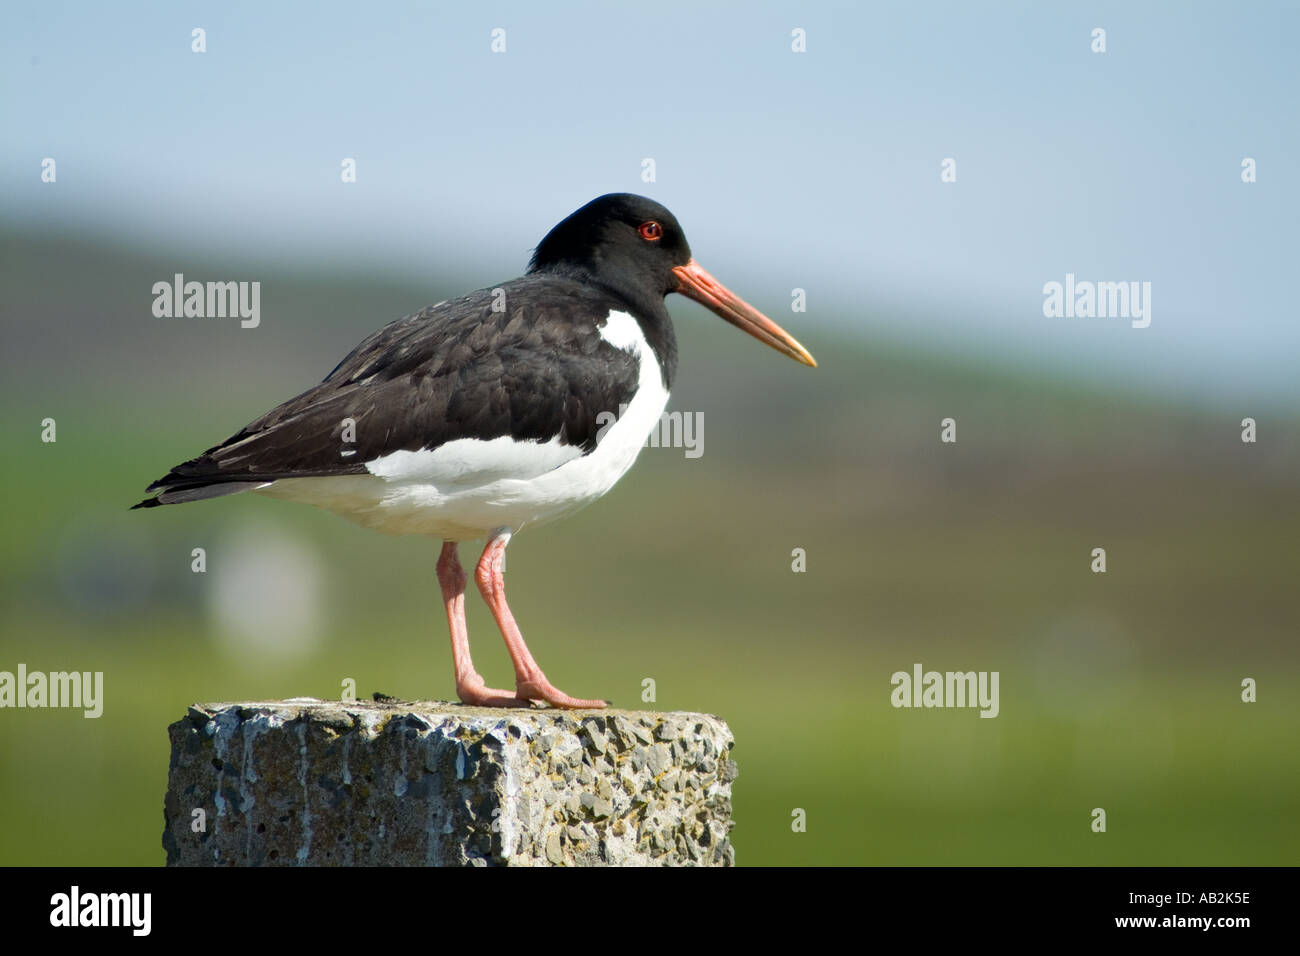 dh Haematopus ostralegus WADERS SCOZIA Eurasian Oyster catcher Haematopus uccello comune pied Oystercatcher Wader uccelli uk estate palaearctic Foto Stock